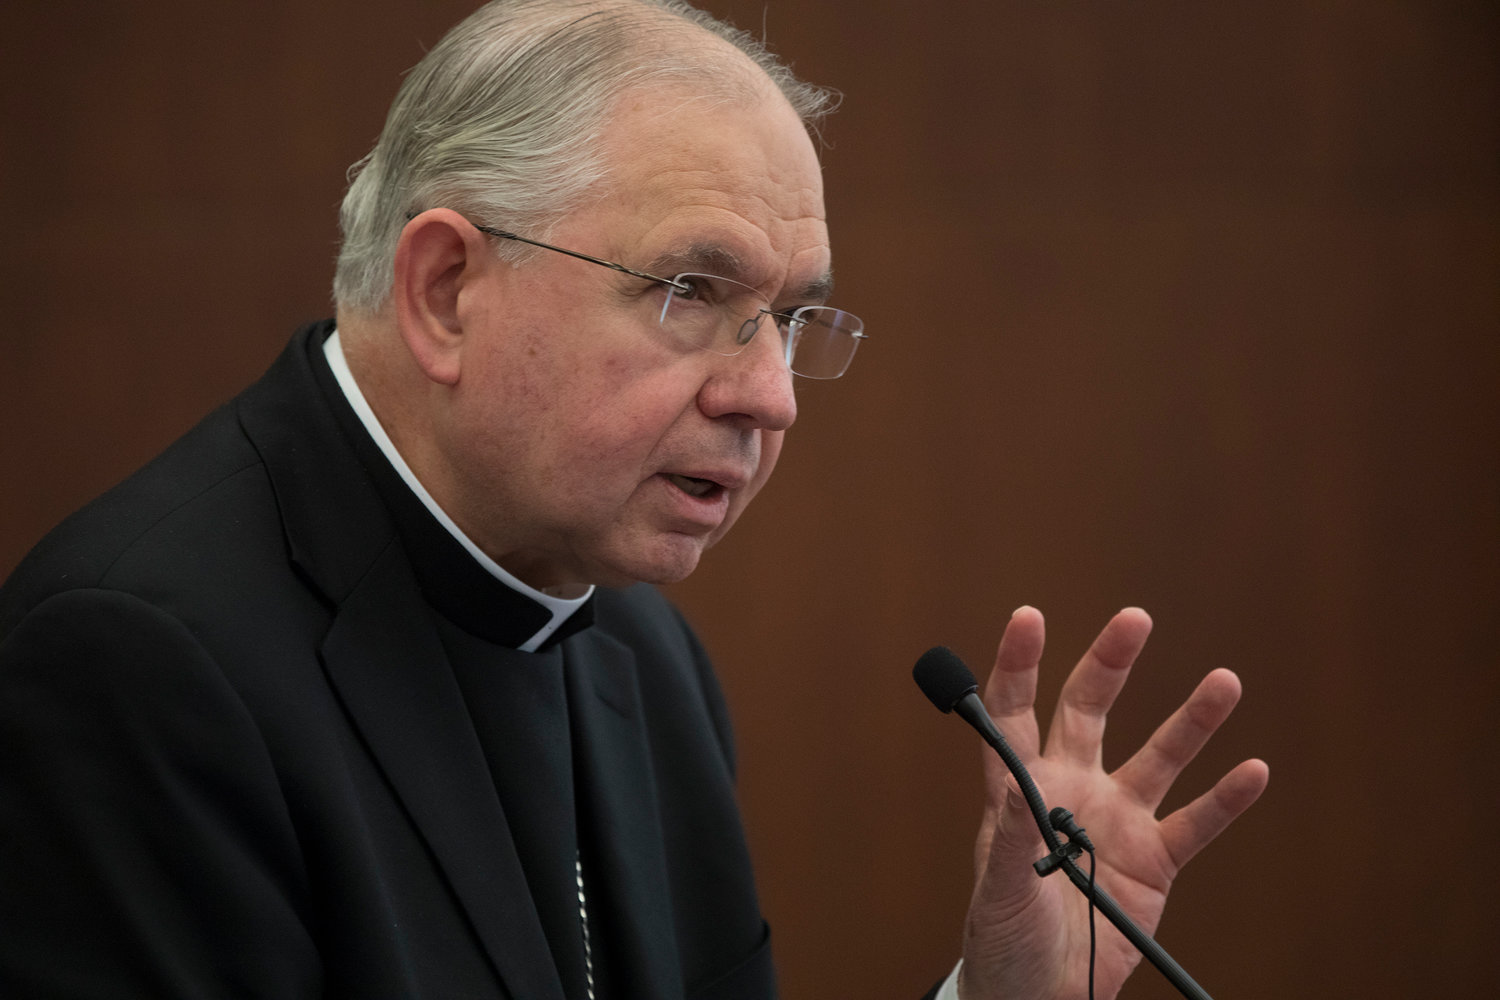 Archbishop Jose H. Gomez of Los Angeles speaks during a lecture at The Catholic University of America in Washington Feb. 6, 2019. The Los Angeles Archdiocese and five other California dioceses, Fresno, Orange, Sacramento, San Bernardino and San Diego, announced a new independent compensation program for sex abuse victims. Archbishop Gomez and the state’s other Catholic bishops also are speaking out against a bill to do away with the seal of confession in cases of abuse.